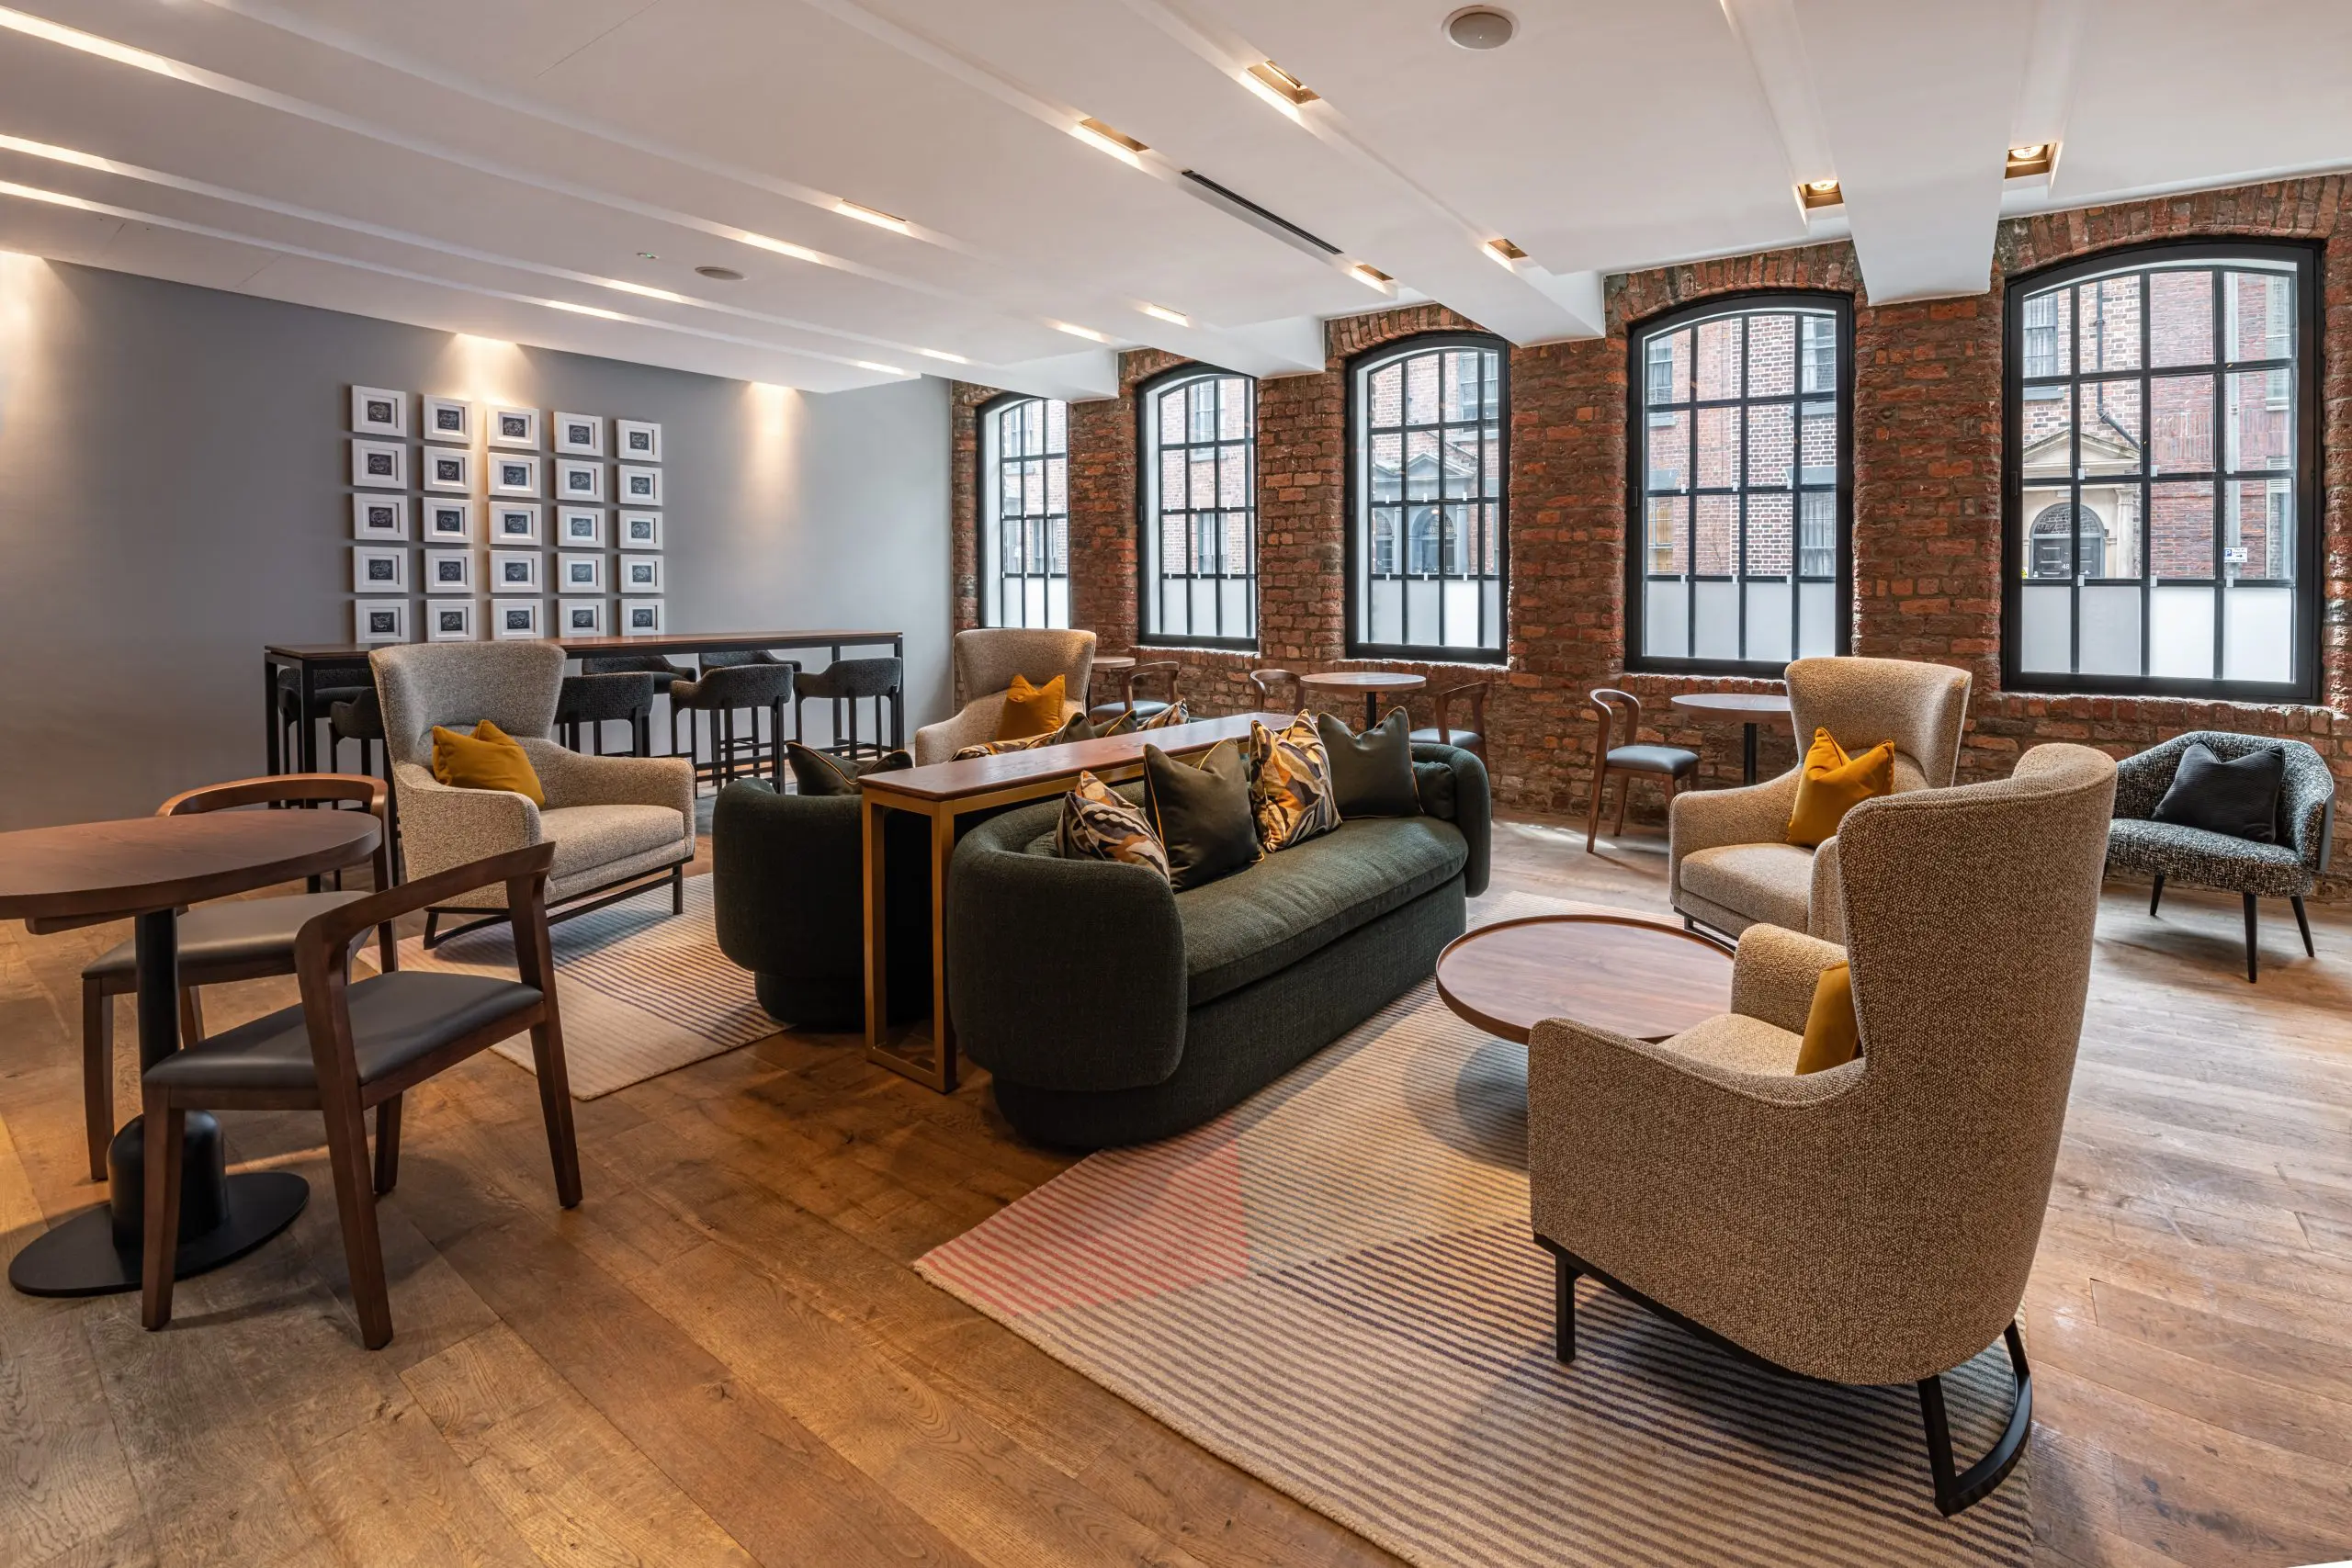 The Resident Liverpool lounge with multiple seating areas and coffee tables.